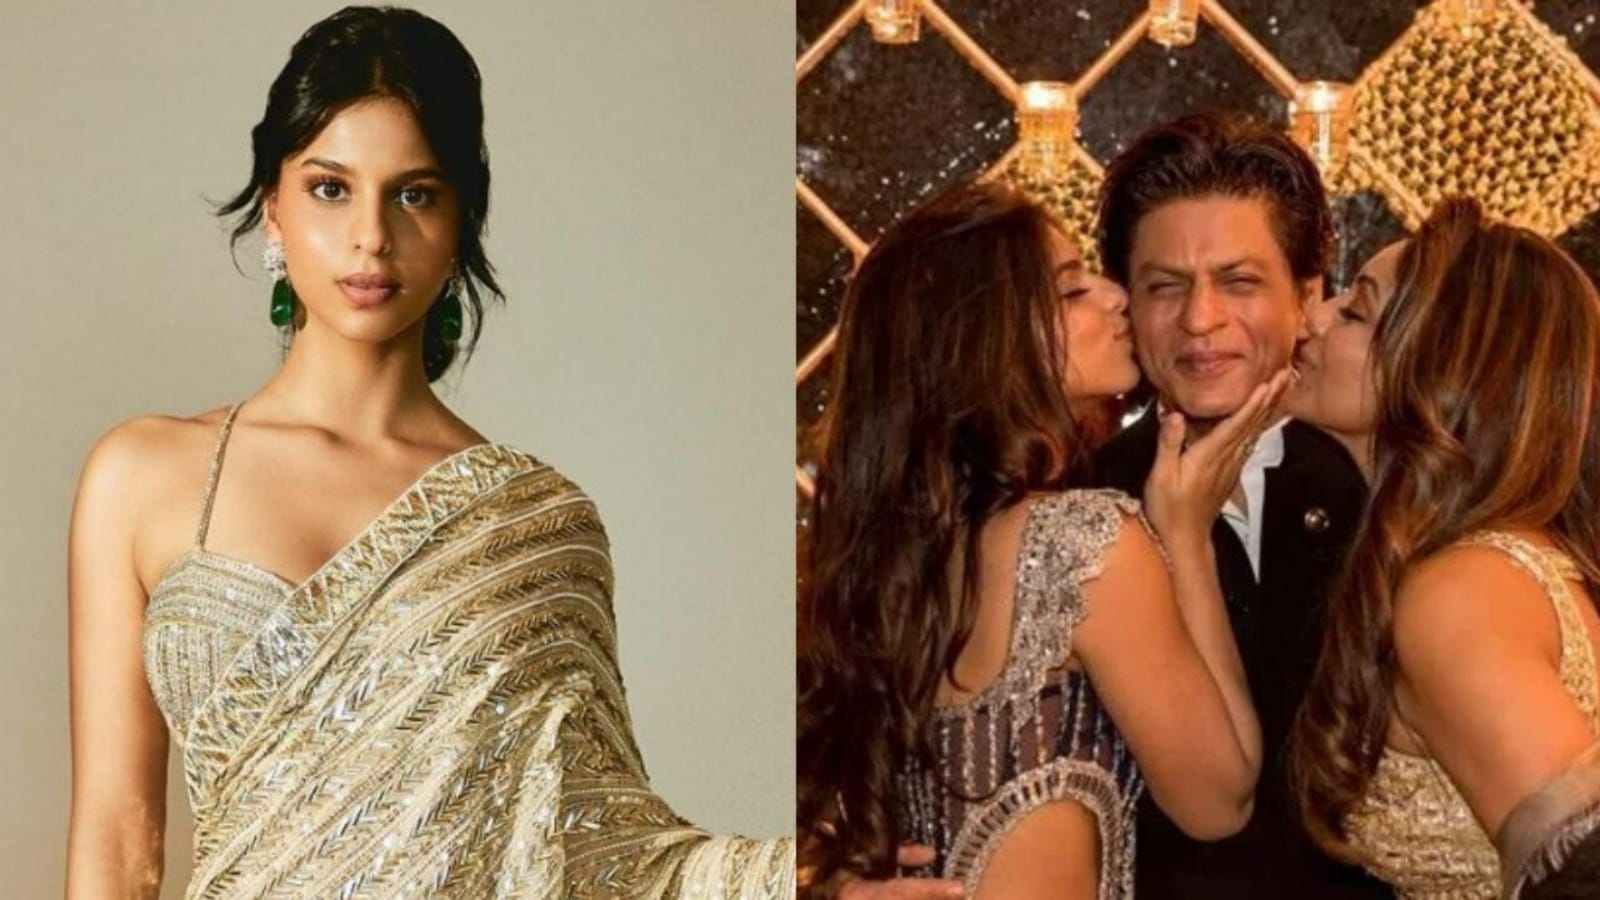 Shah Rukh Khan leaves comment on Suhana's pics, asks who helped her wear saree | Bollywood - Hindustan Times